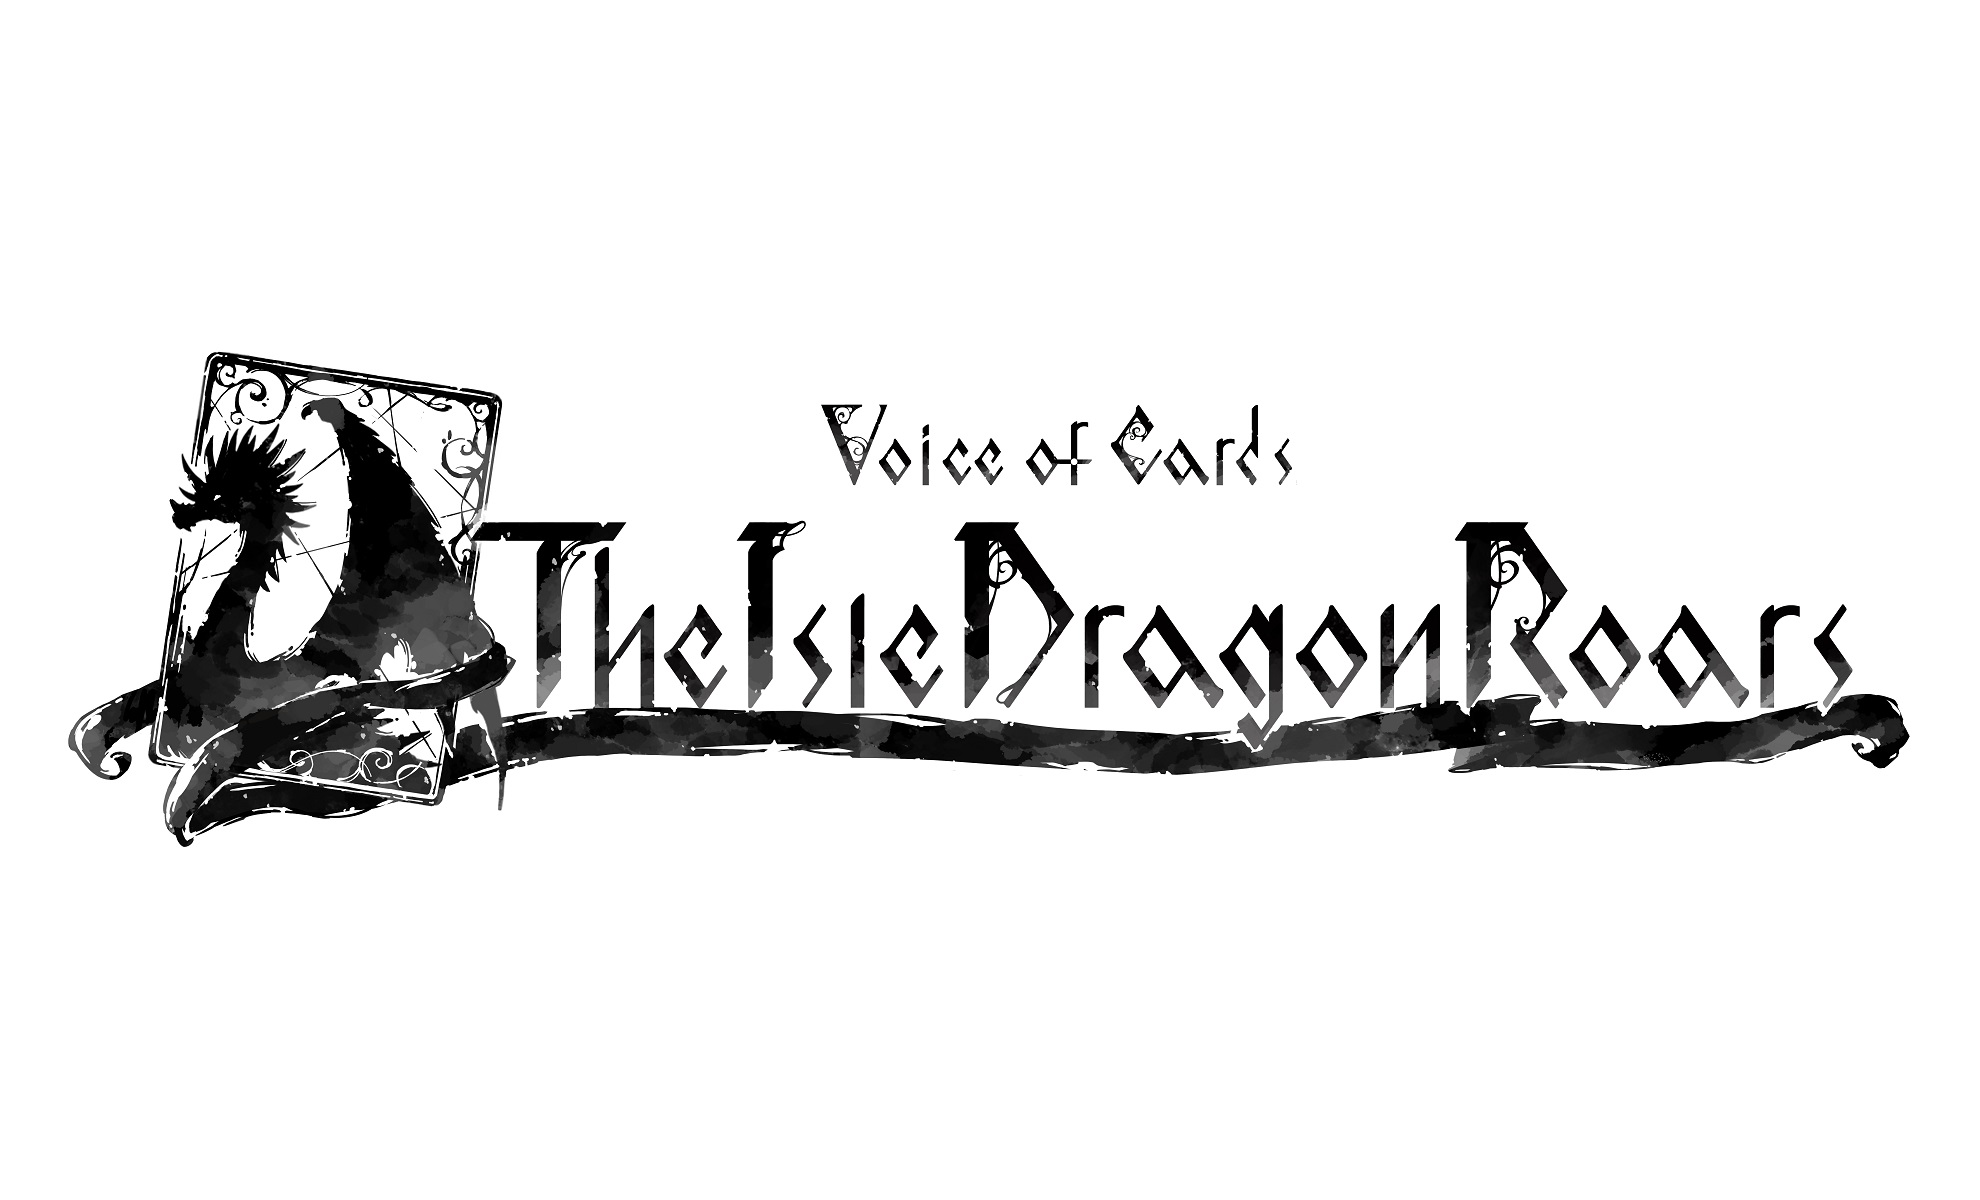 Voice of Cards : The Isle Dragon Roars